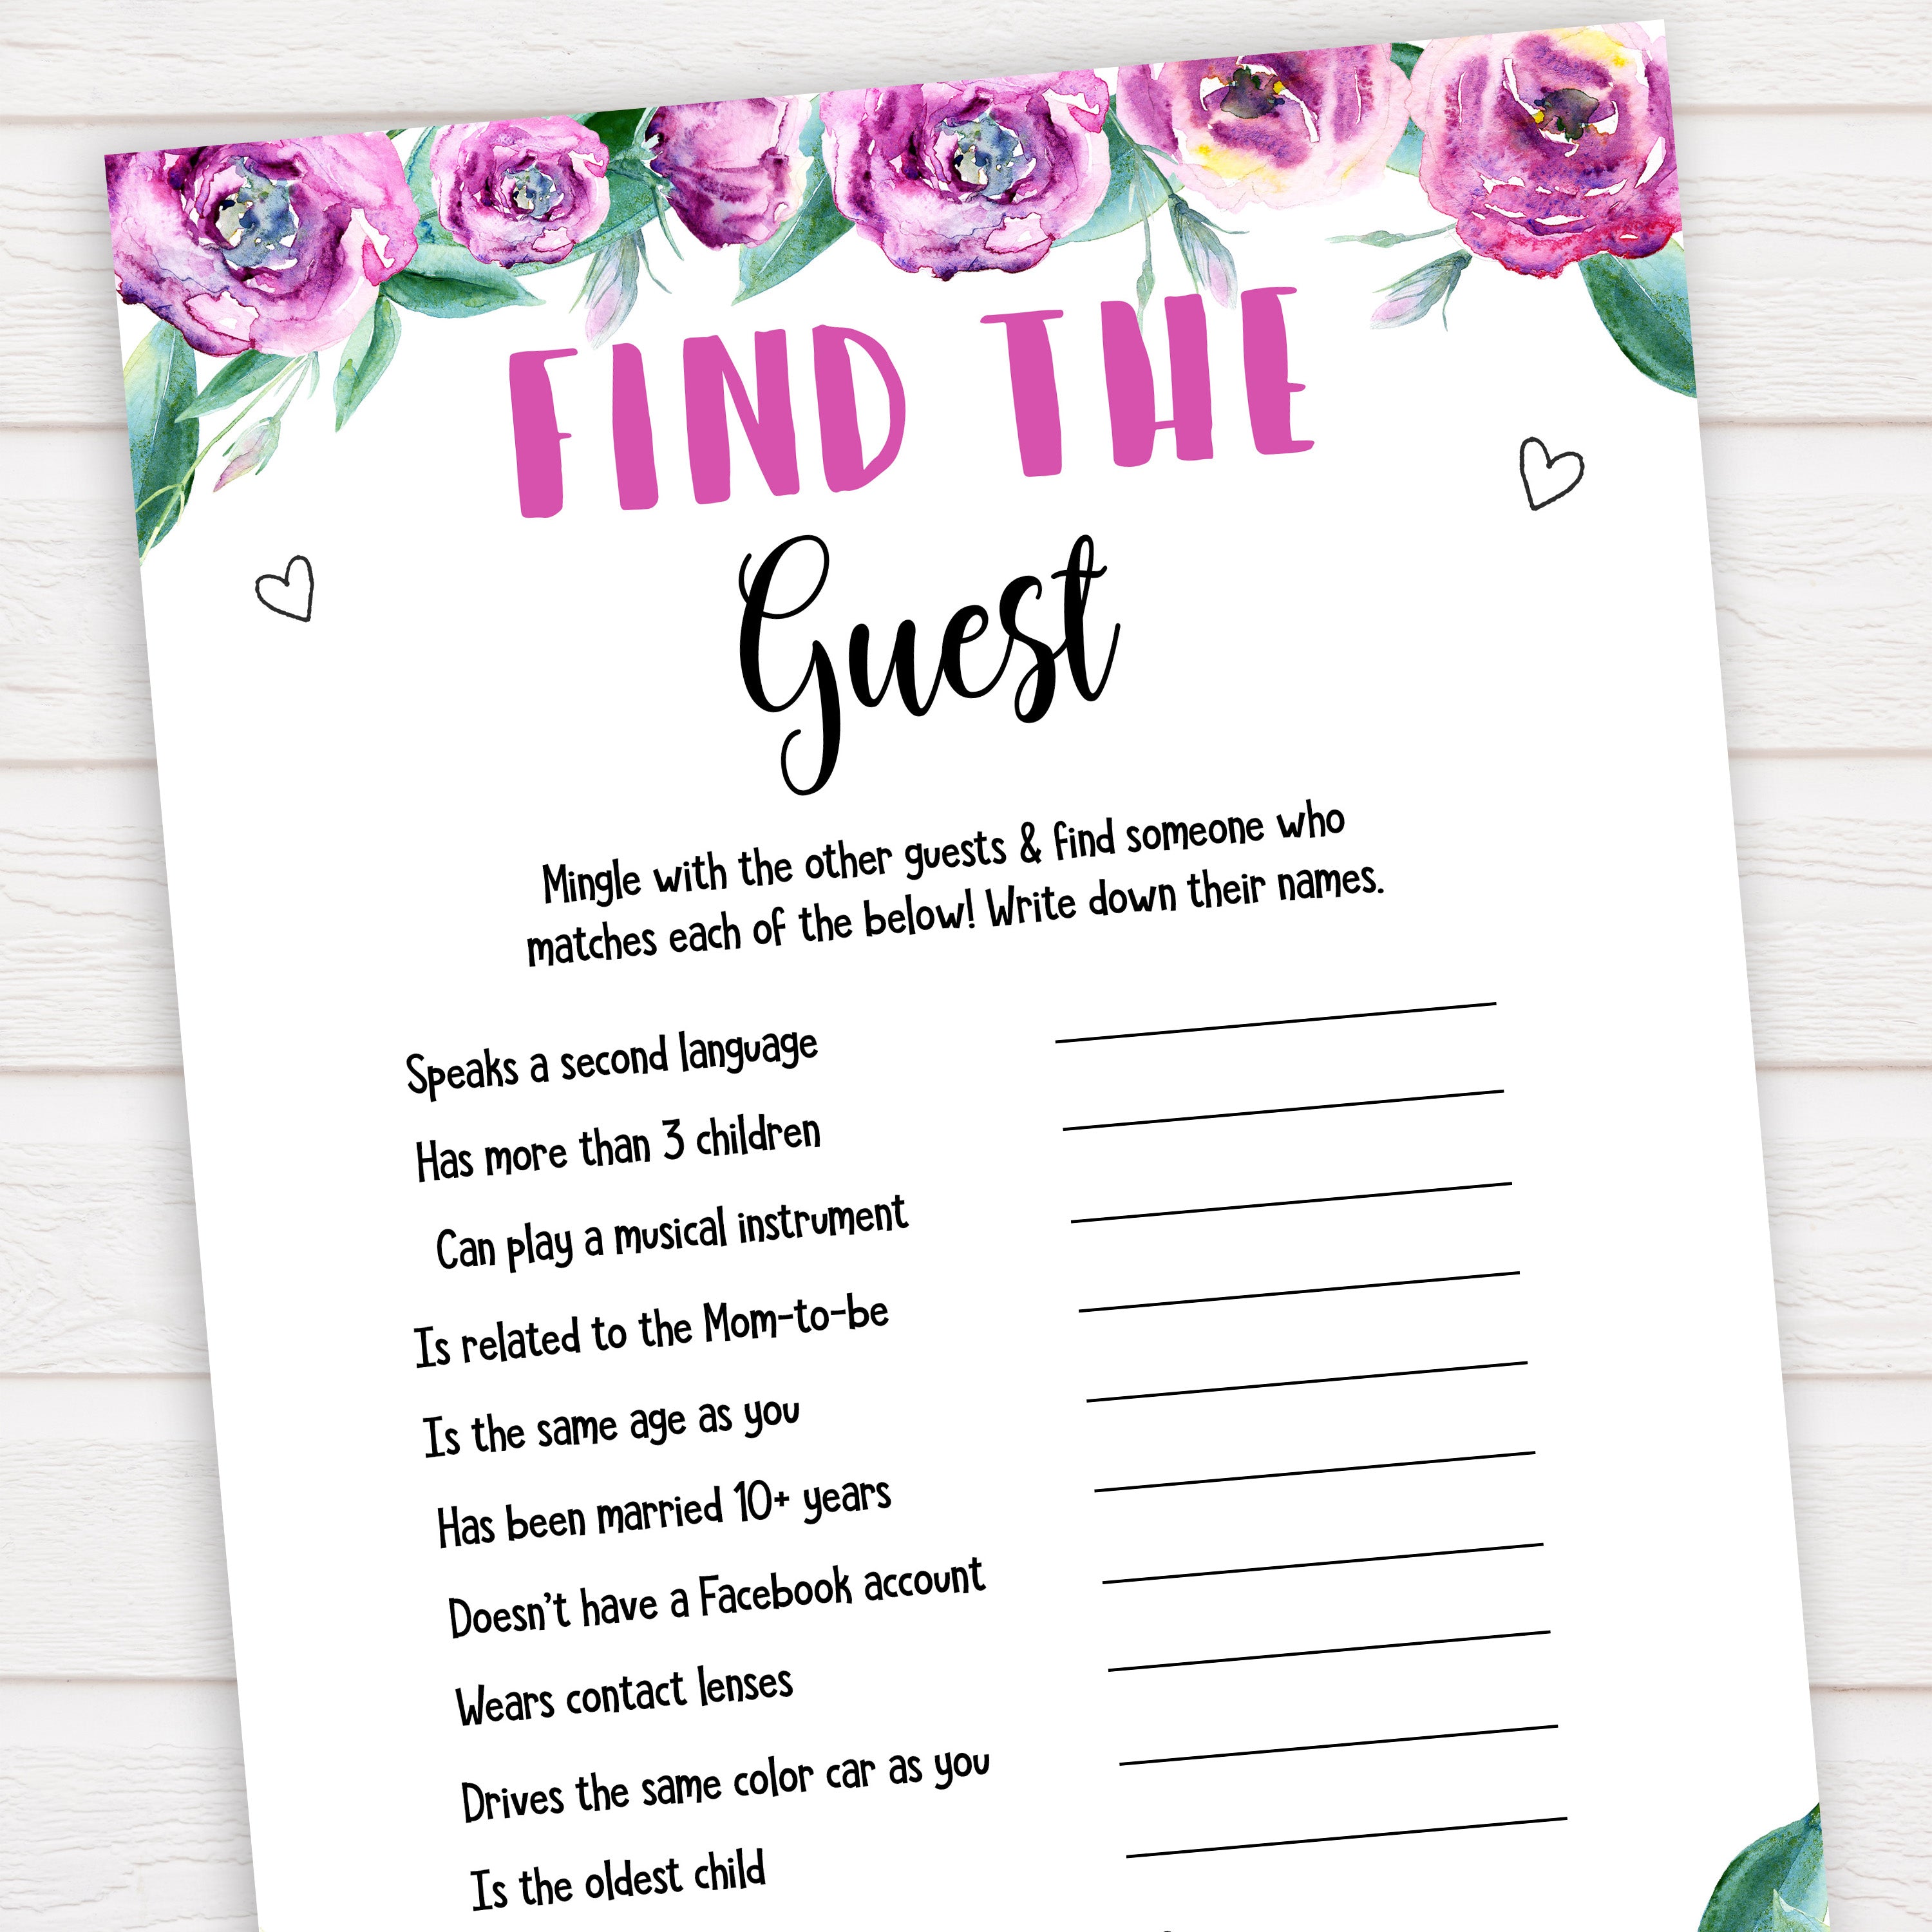 Purple peonies find the guest baby shower games, printable baby shower games, fun baby shower games, baby shower games, popular baby shower games, floral baby shower games, purple baby shower themes